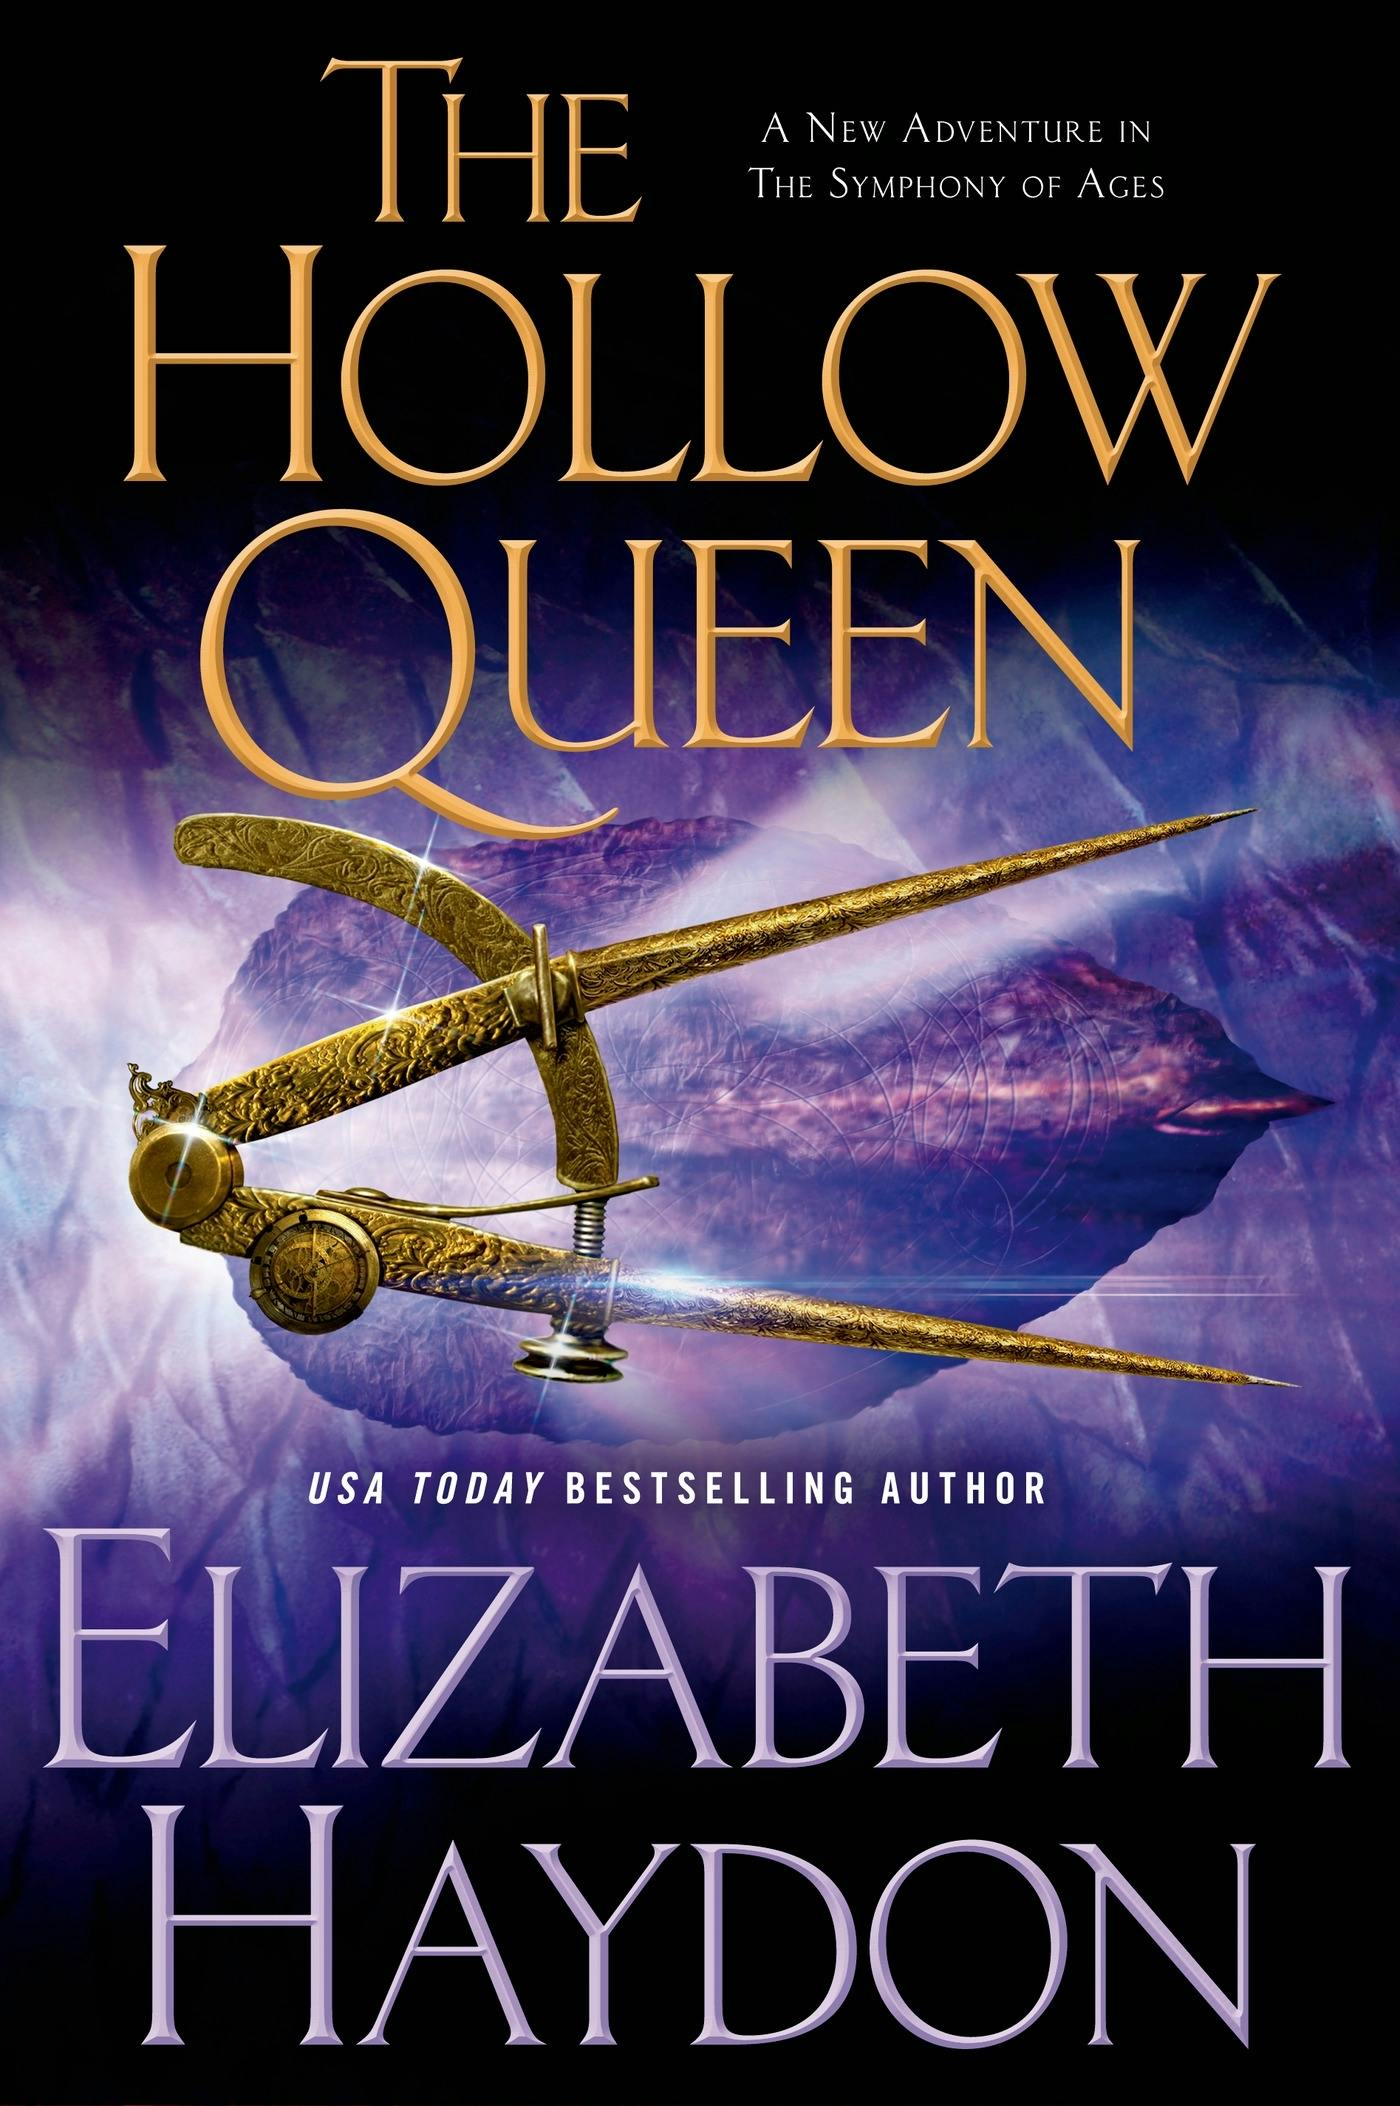 Cover for the book titled as: The Hollow Queen